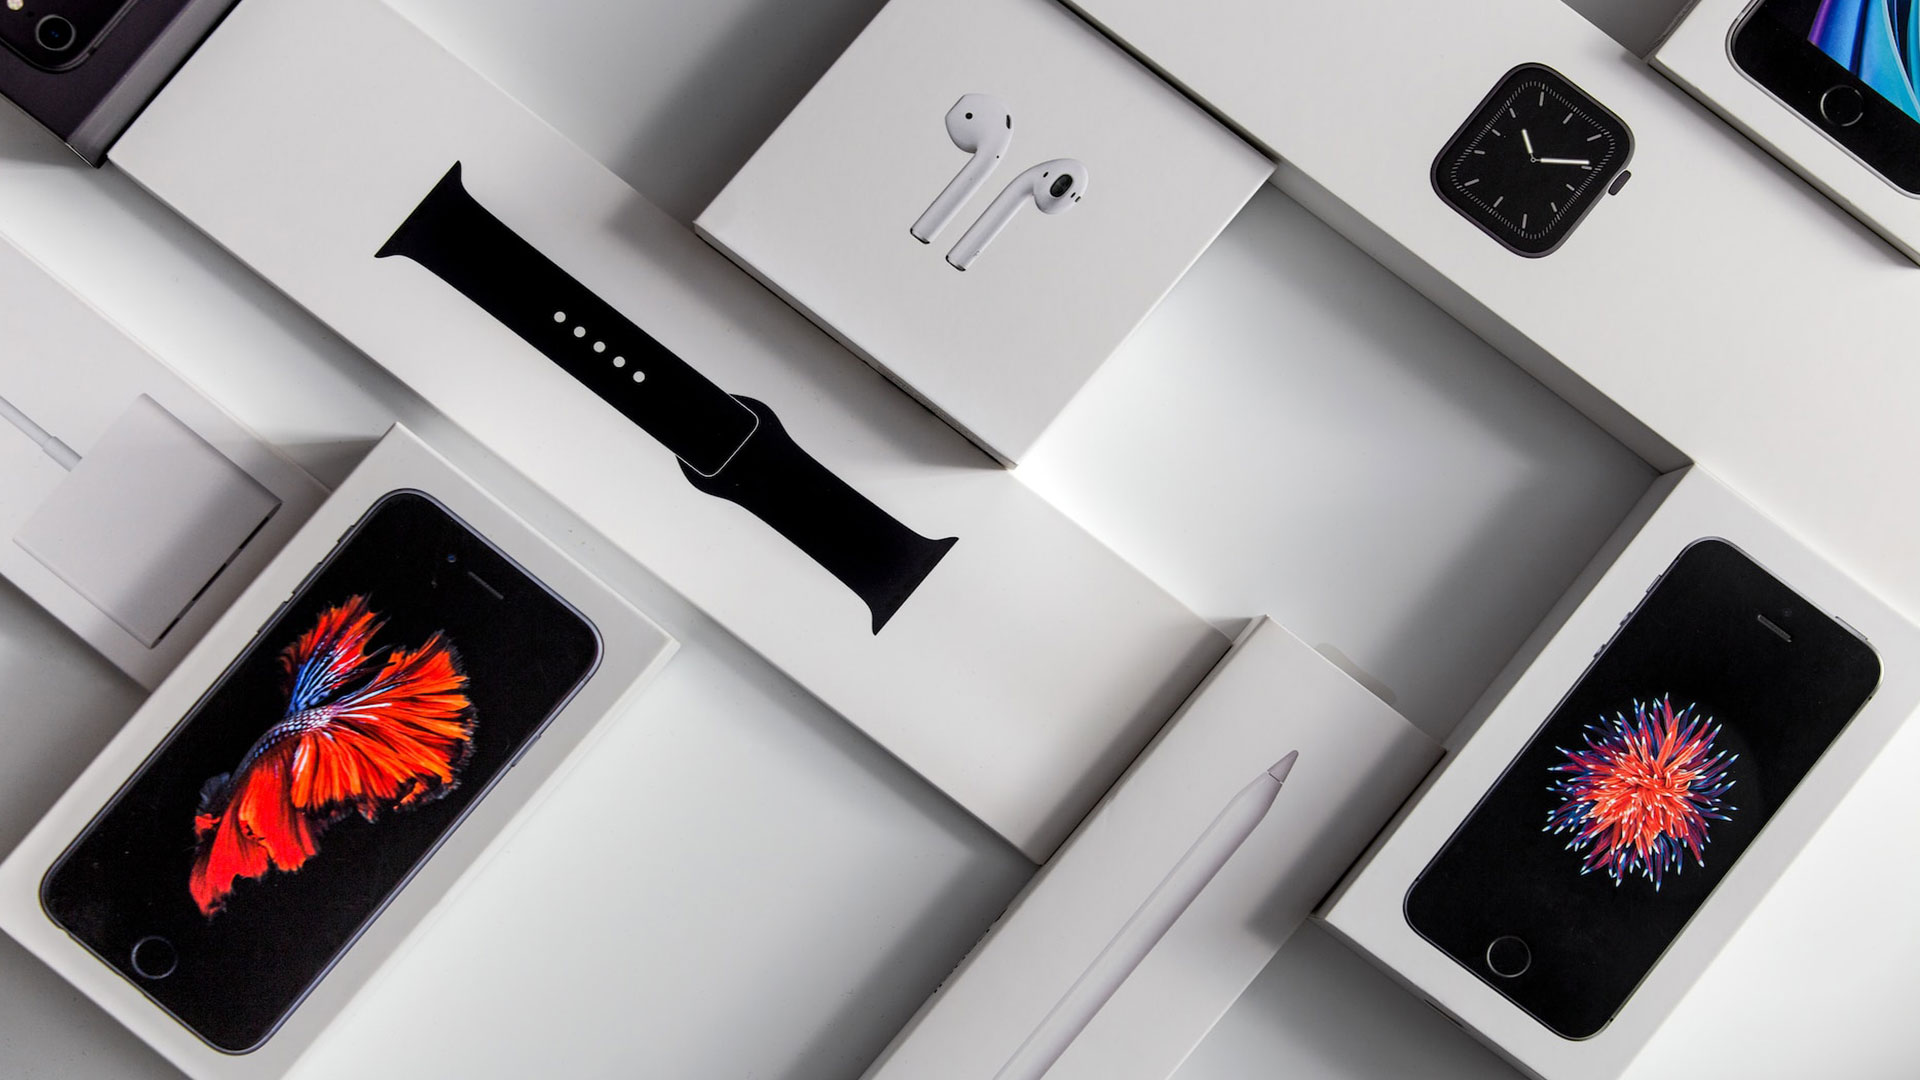 Packaging of various products including a smartphone, watch, electronic pencil, and charger.